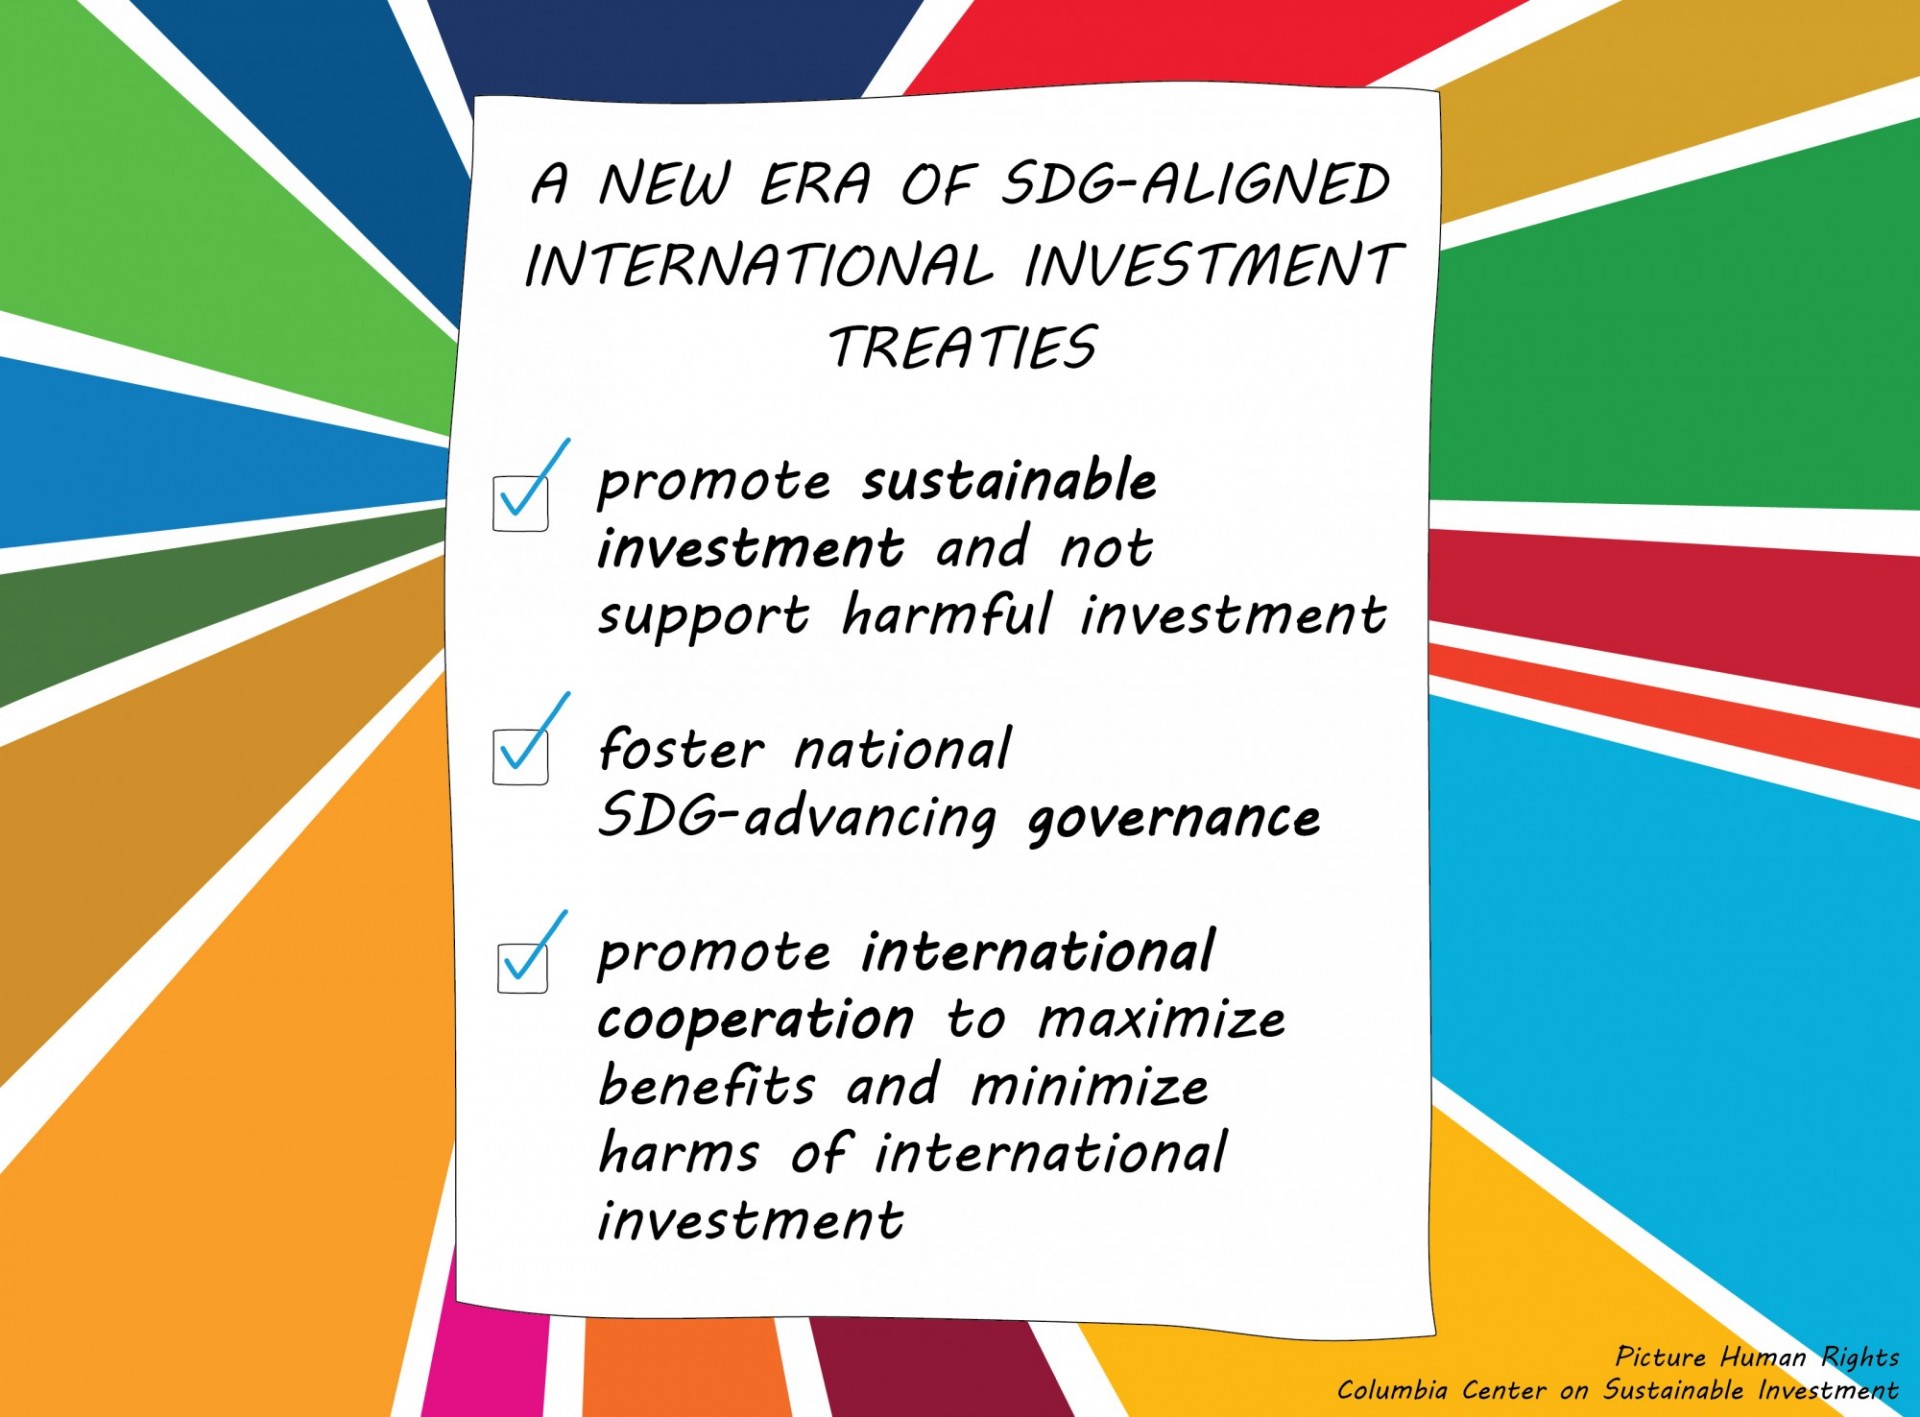 Graphic titled "A New Era of SDG-Aligned International Investment Treaties" depicting a paper checklist including checked tasks that read "promote sustainable investment and not support harmful investment," "foster national SDG-advancing governance," and promote international cooperation to maximize benefits and minimize harms of international investment."